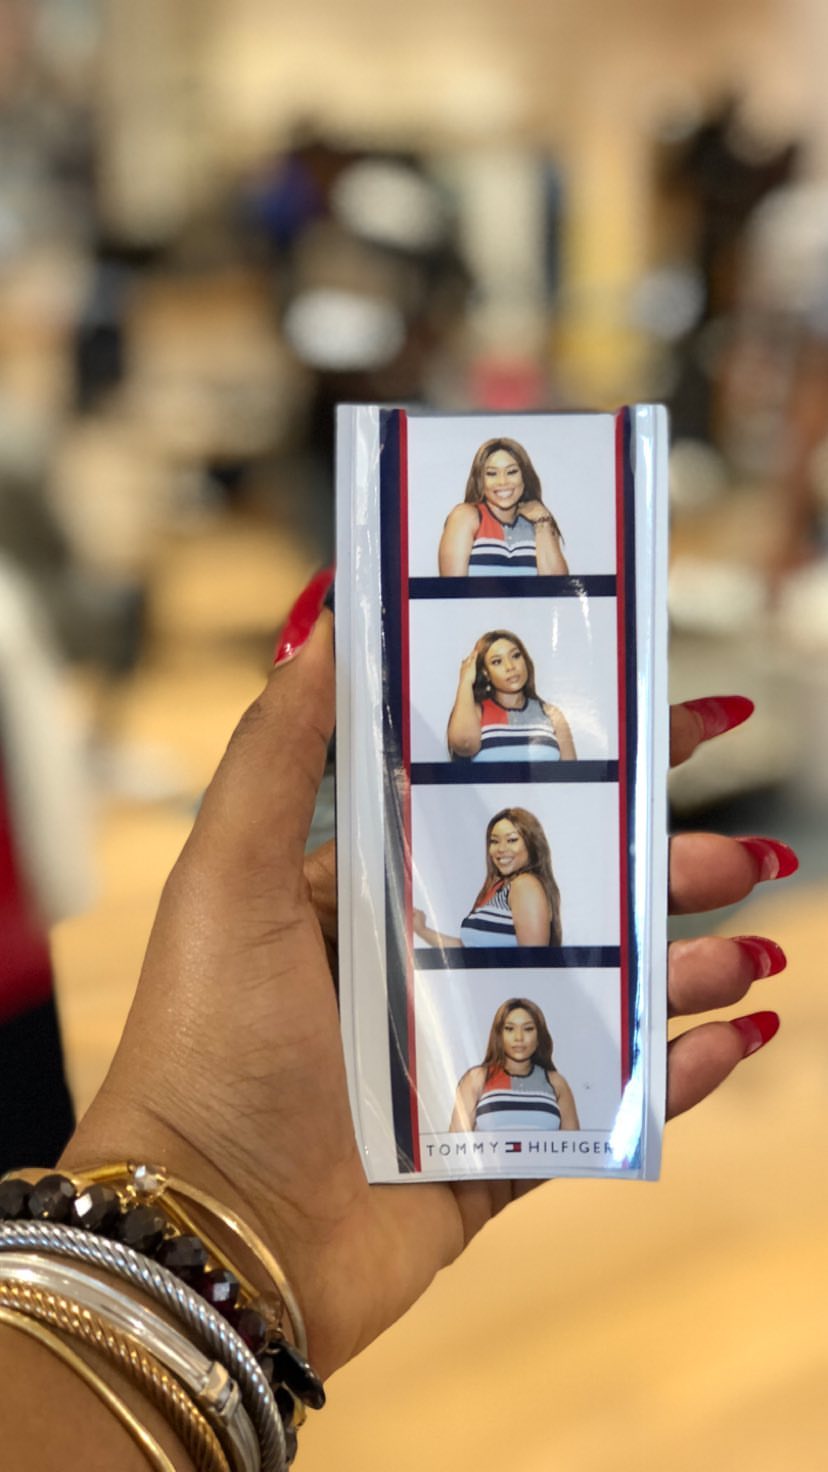 Mimi Onalaja Takes Us Inside Tommy Hilfiger’s Star-Studded Collection Launch Event